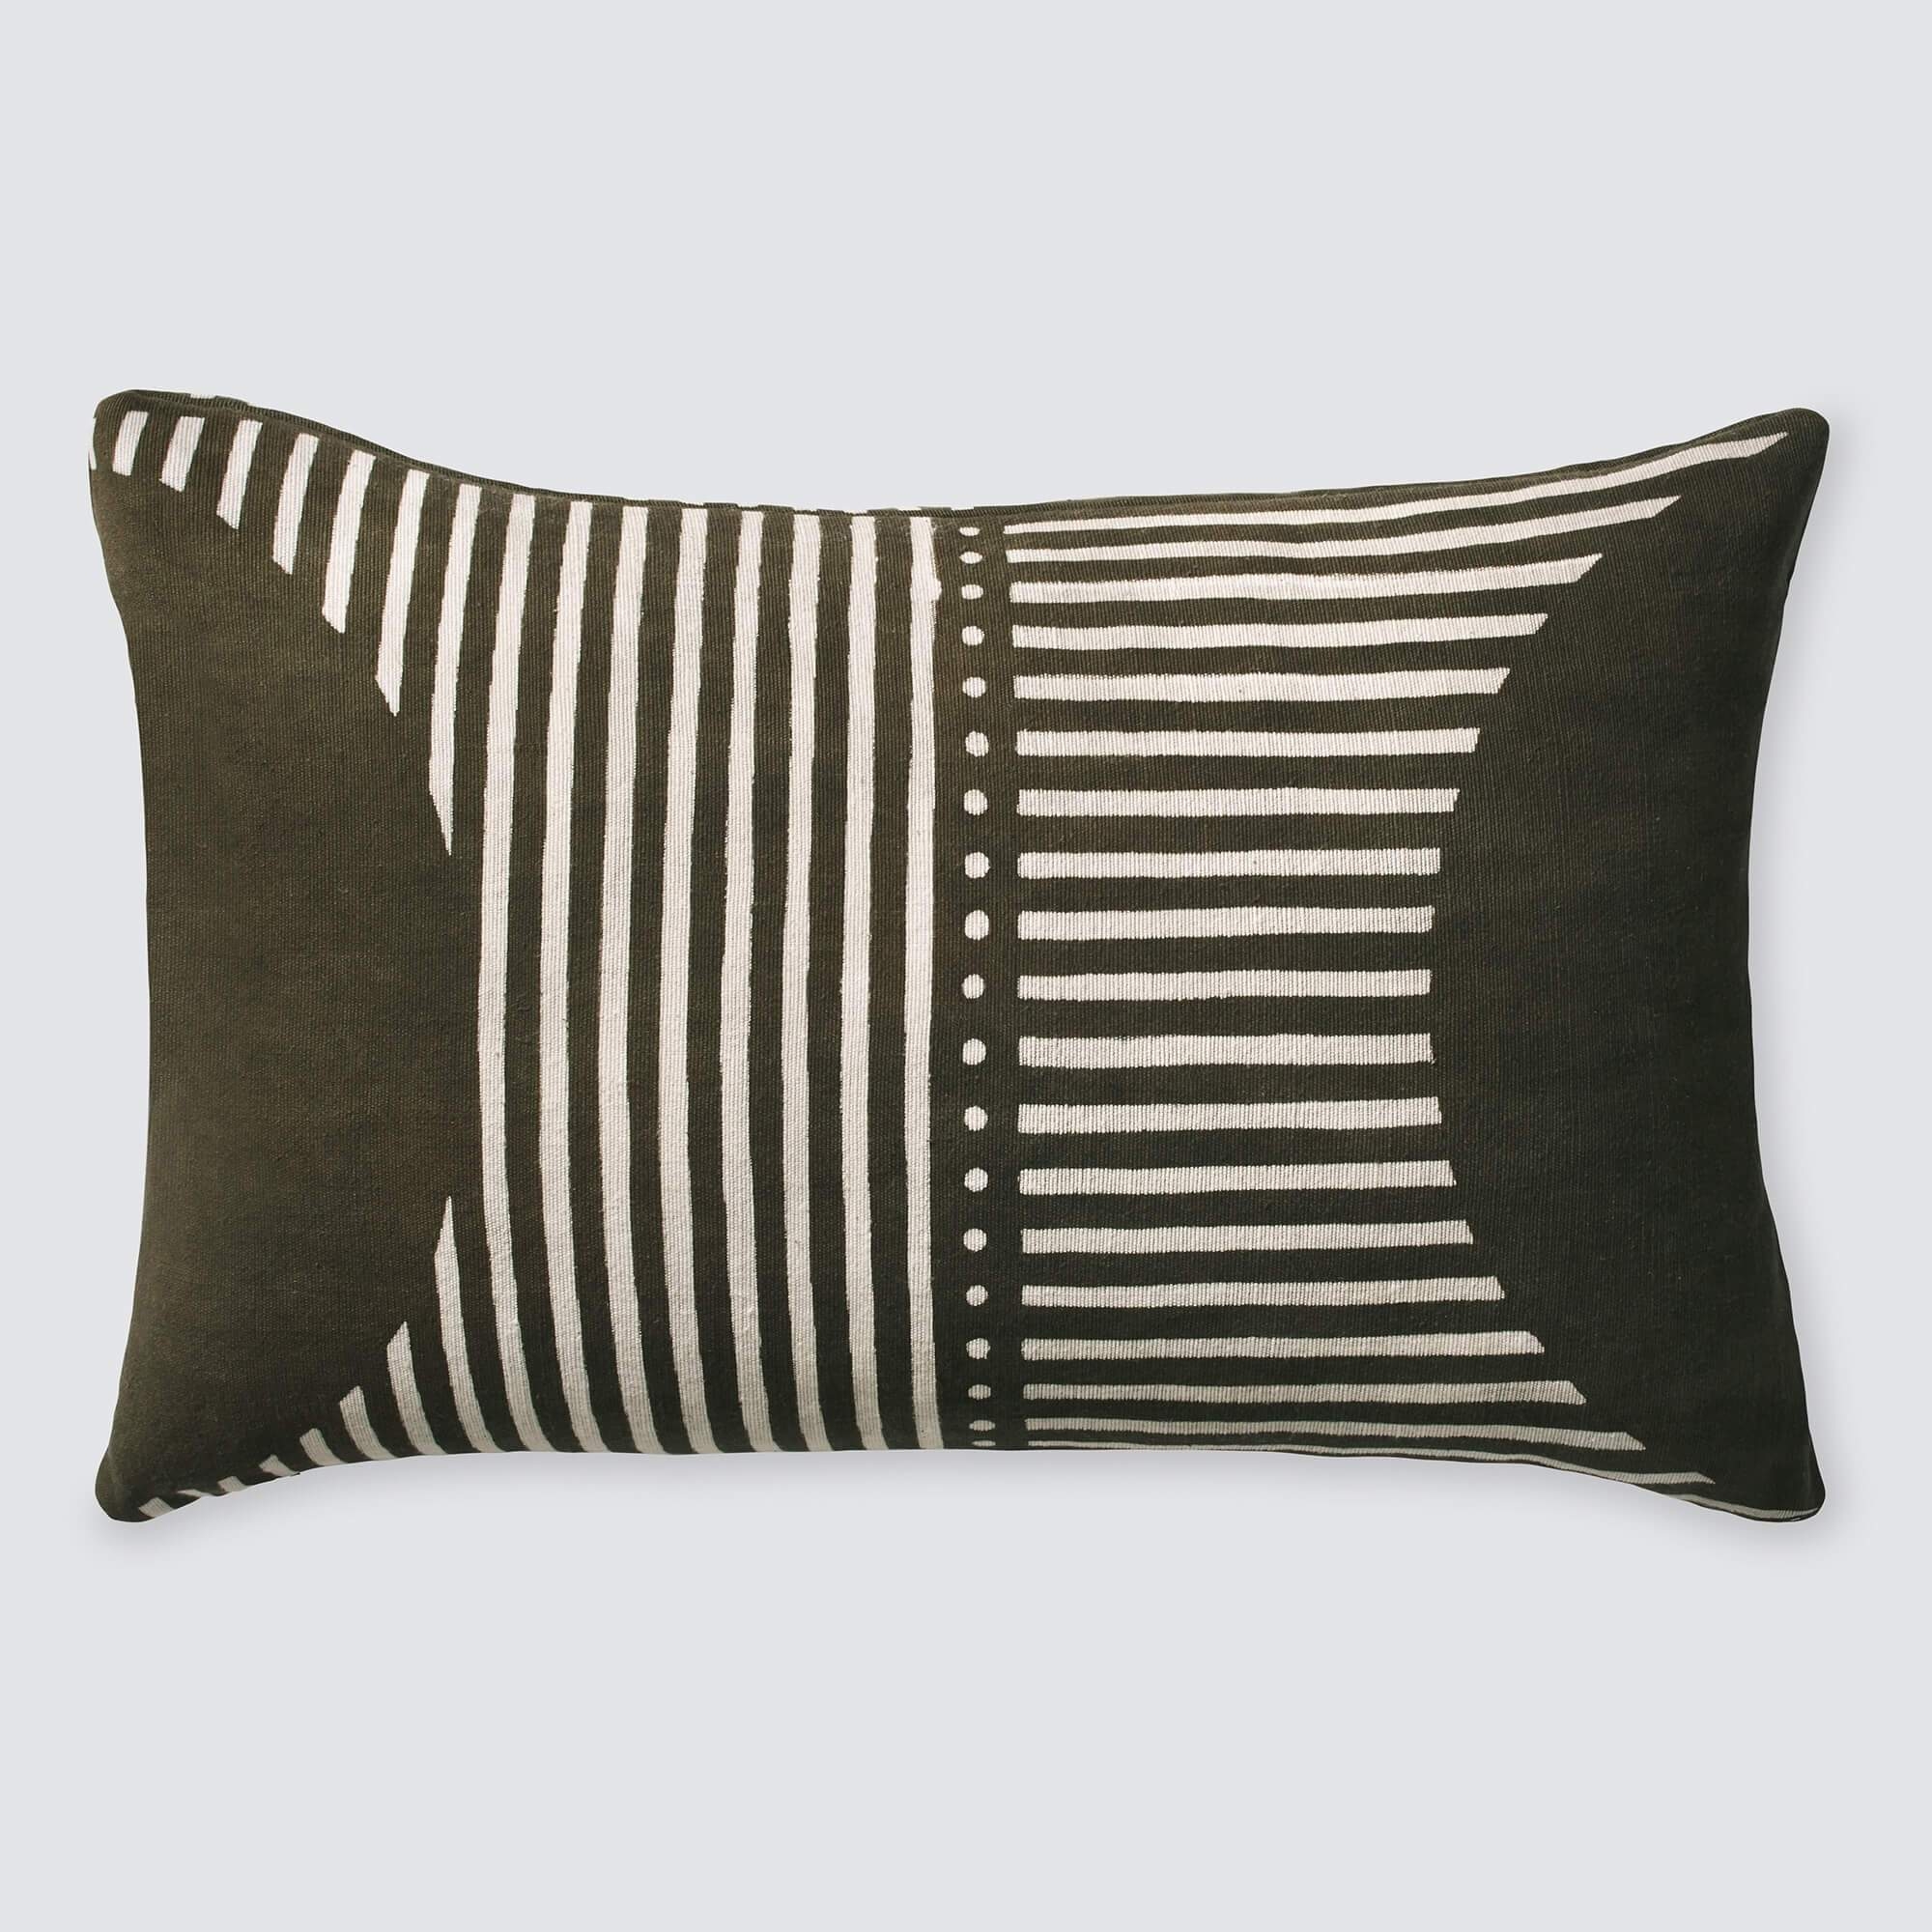 Demi Mud Cloth Lumbar Pillow - Olive By The Citizenry - Image 0